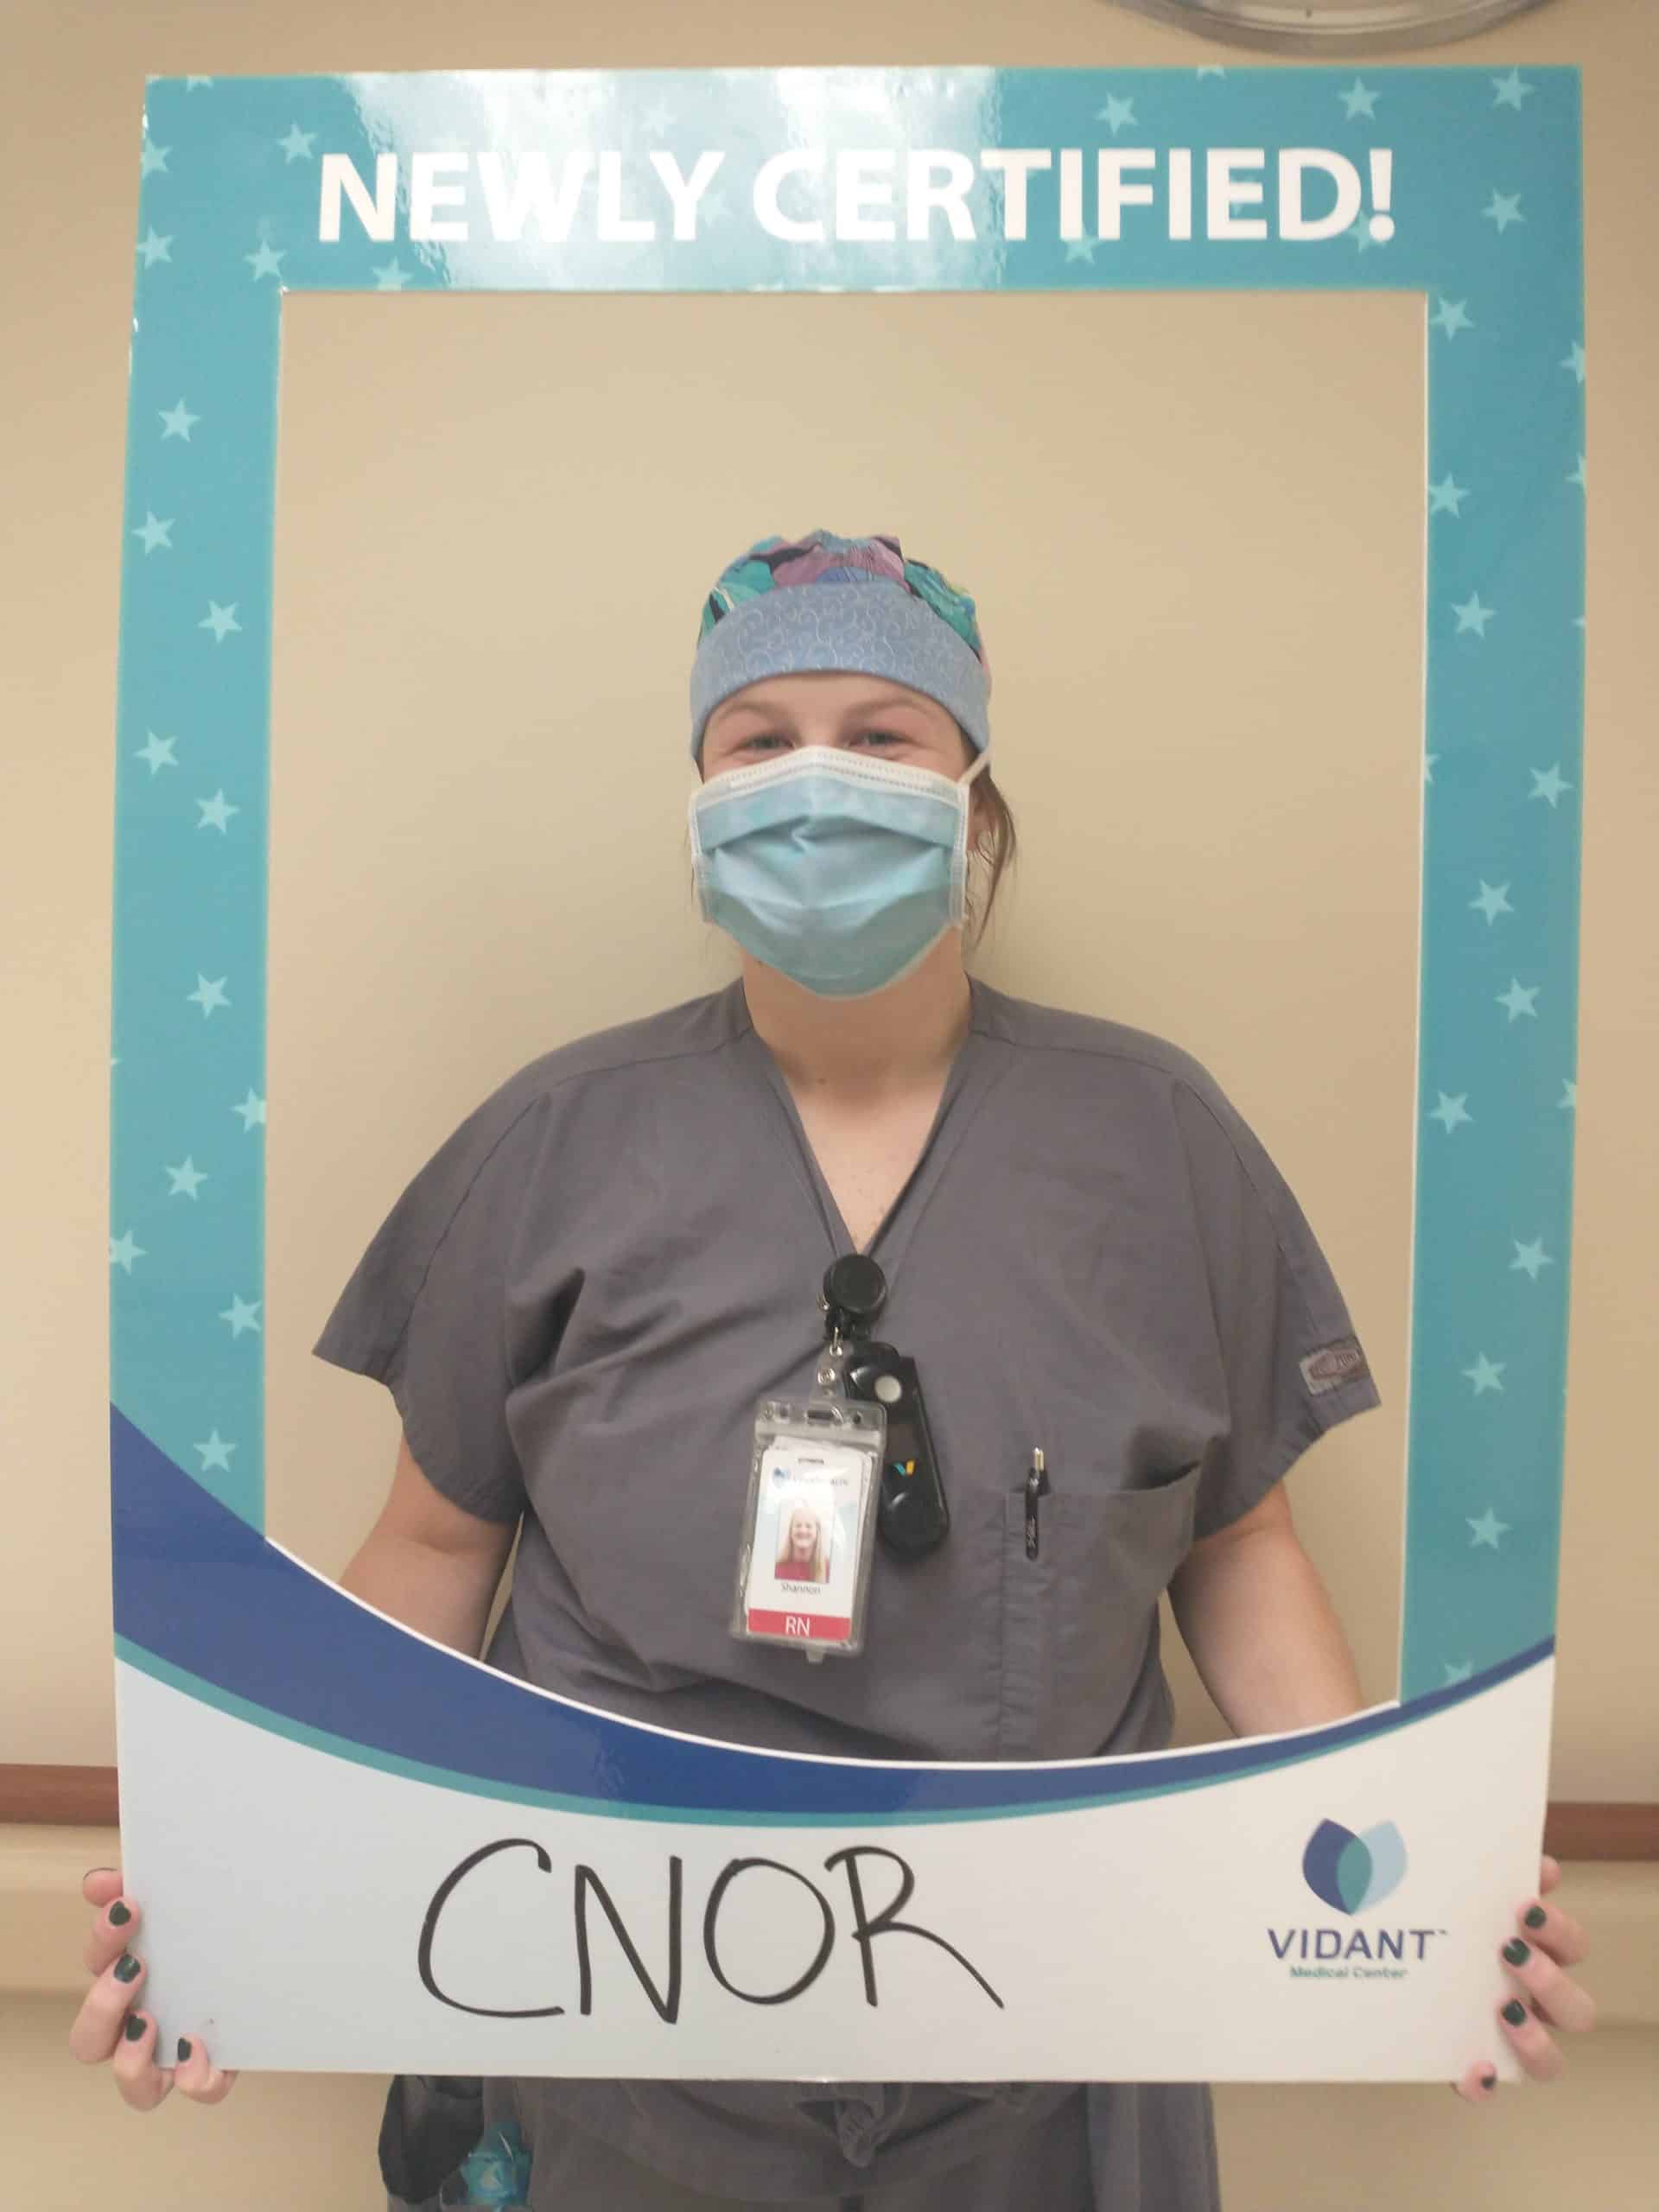 Shannon Evans, BSN, RN, CNOR works in the operating room and received her certified nurse of OR certification